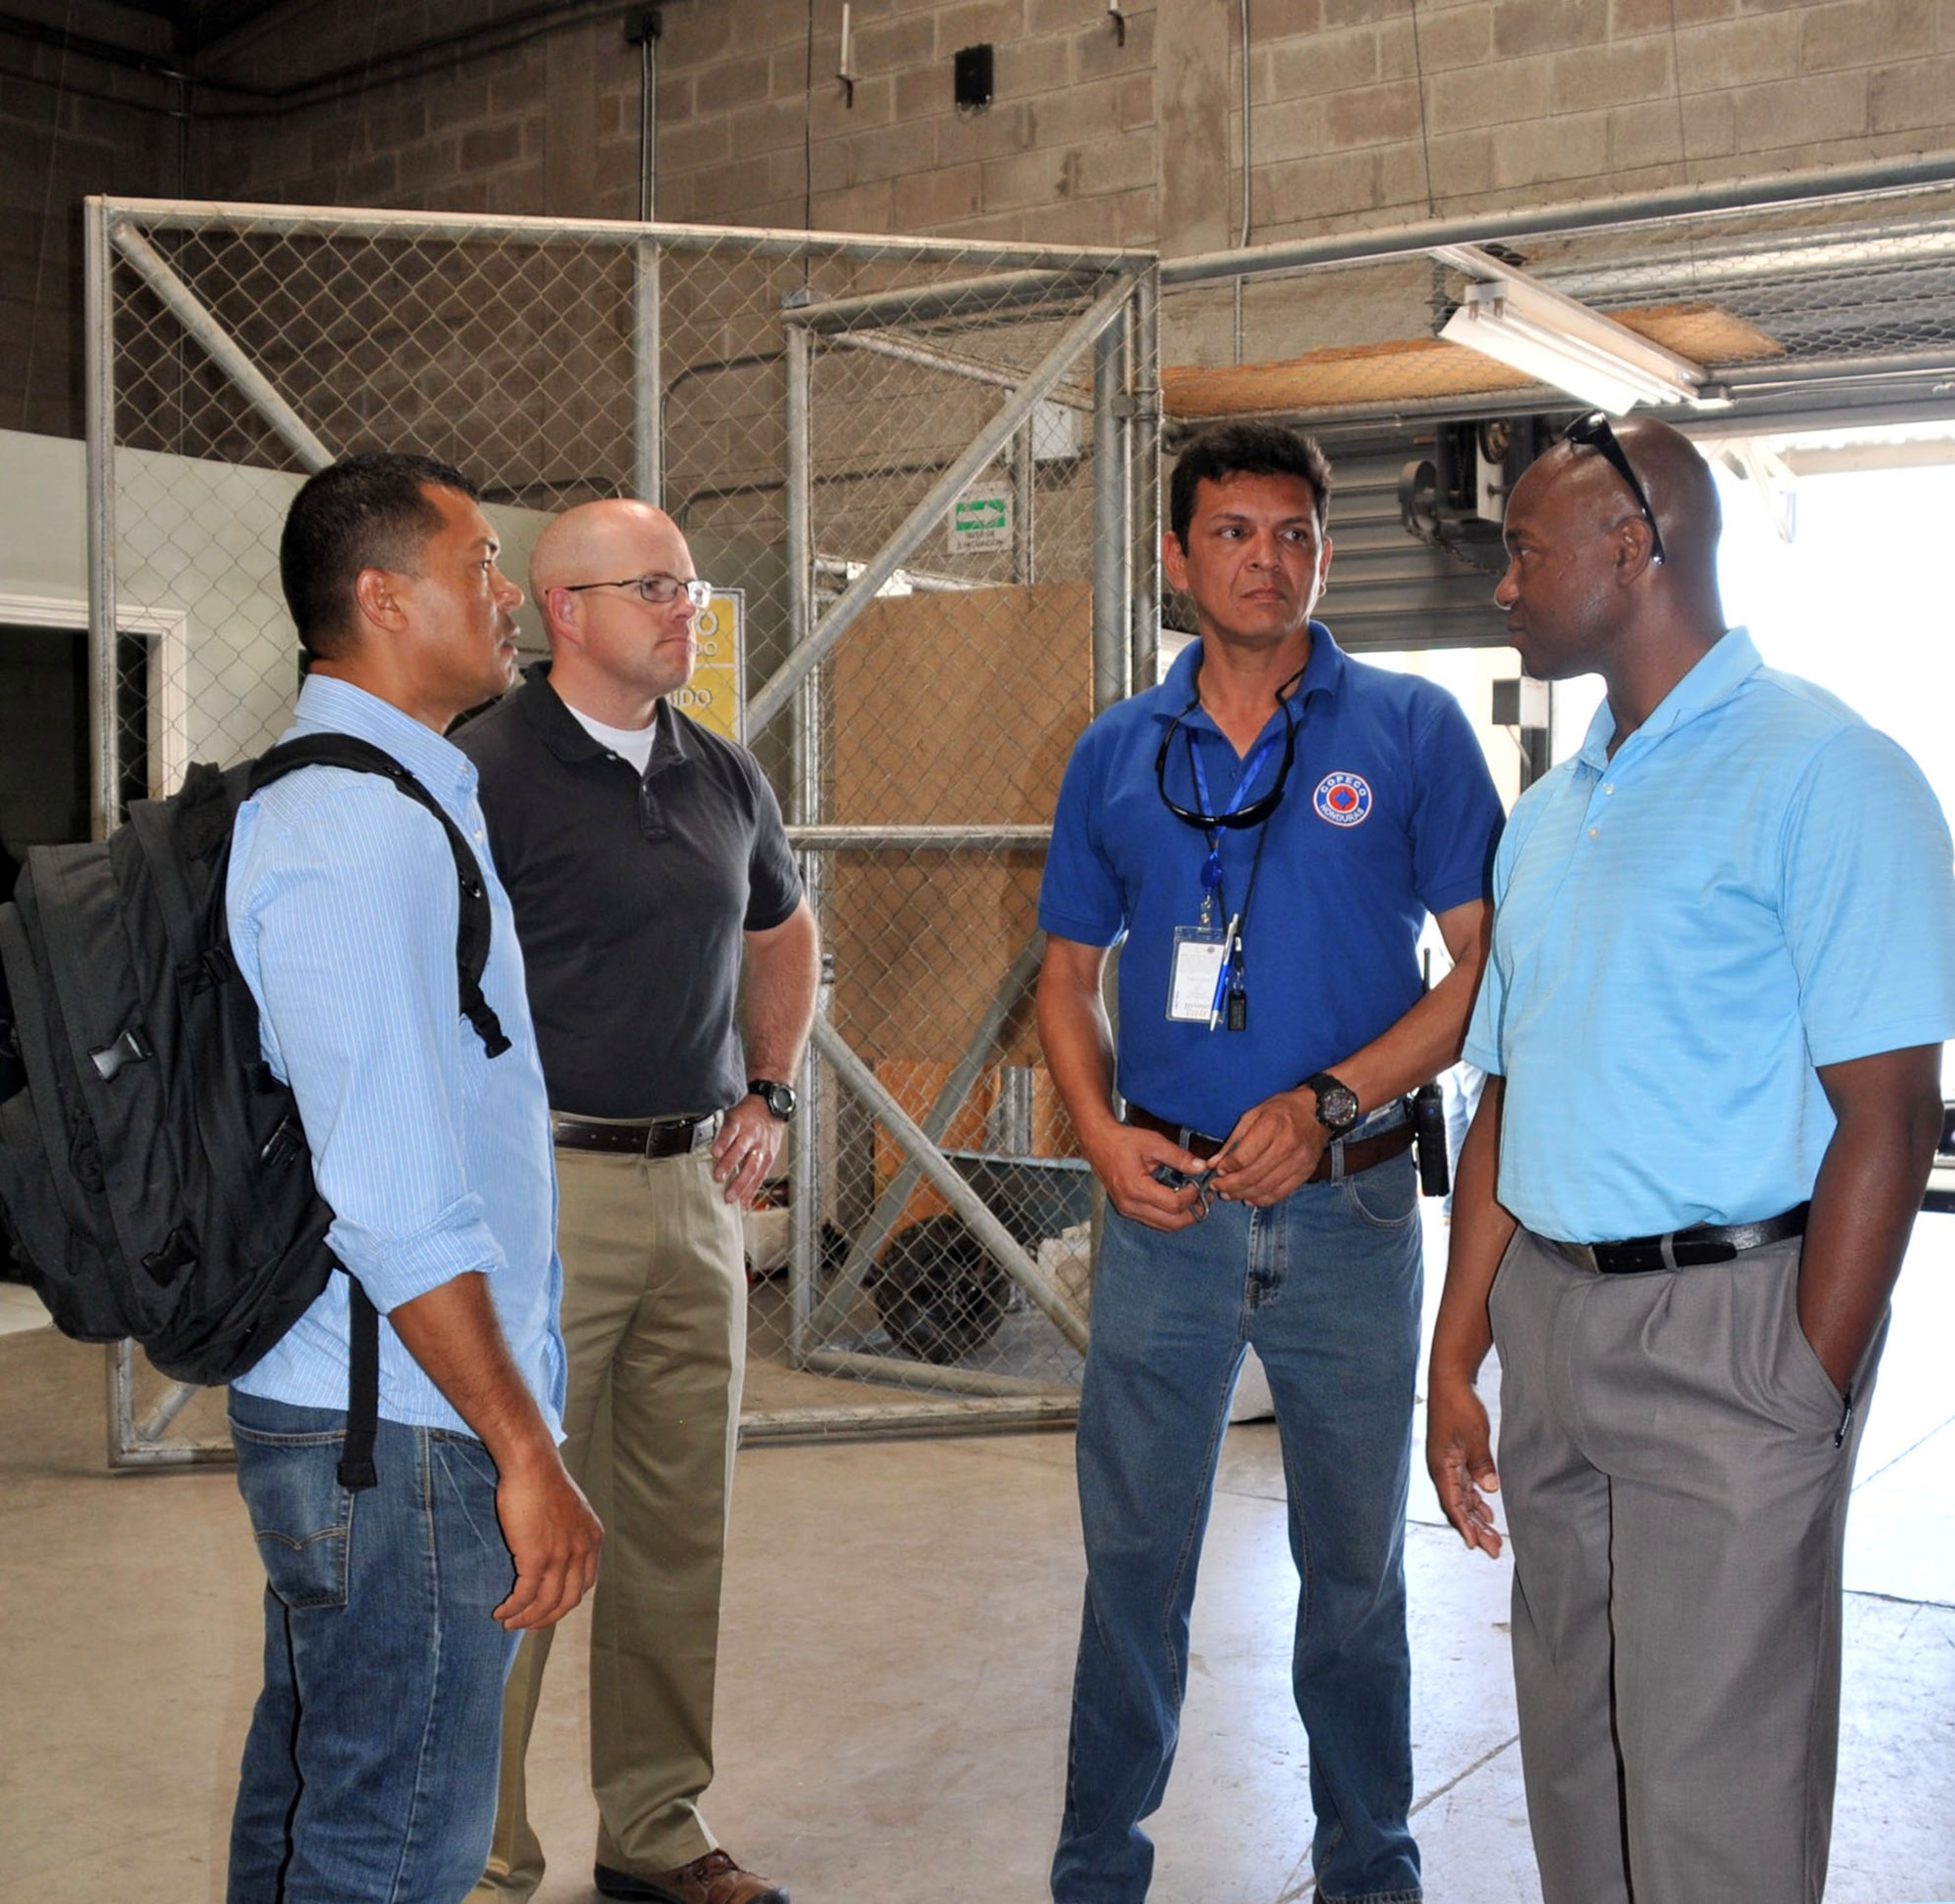 Joint Task Force-Bravo servicemembers conducted a visit to the Permanent Contingency Commission, the Honduran FEMA equivalent, in Tegucigalpa, Honduras to learn about disaster relief capabilities and be familiarized with the Honduran emergency management team.(Photos by Ana Fonseca)